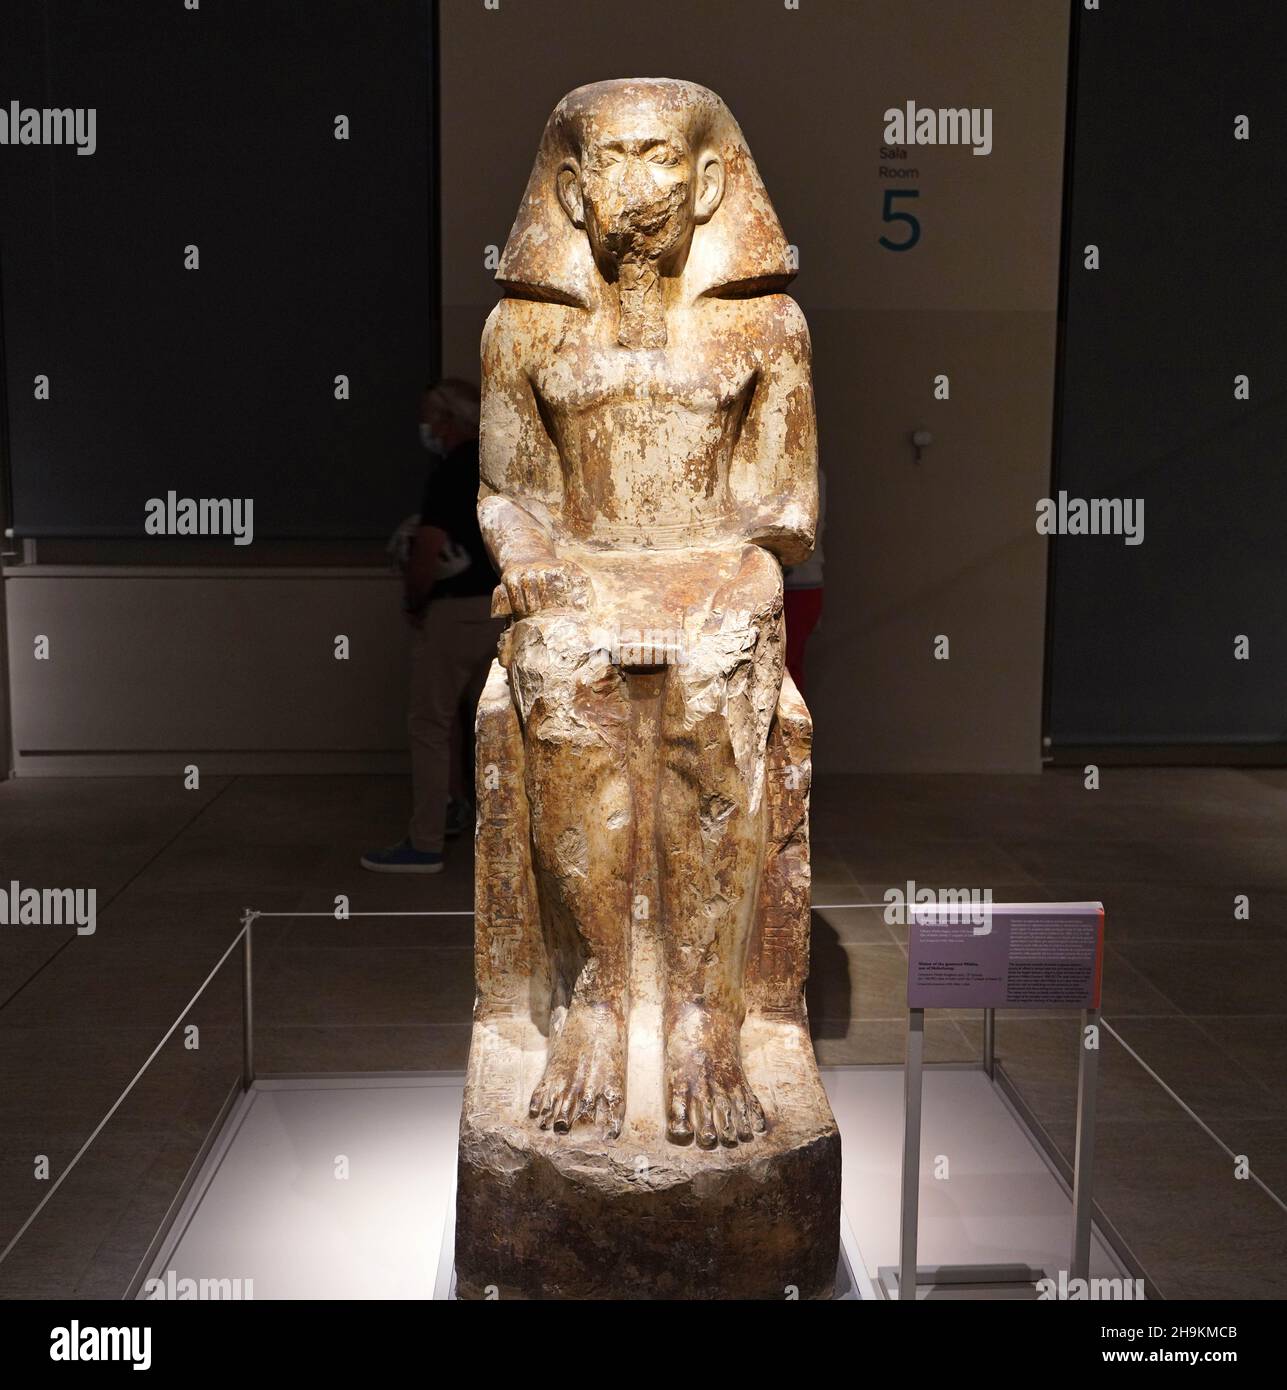 TURIN, ITALY - AUGUST 19, 2021: statue of governor Uahka son of Neferhotep, Egyptian civilization, Egyptian Museum of Turin, Italy Stock Photo